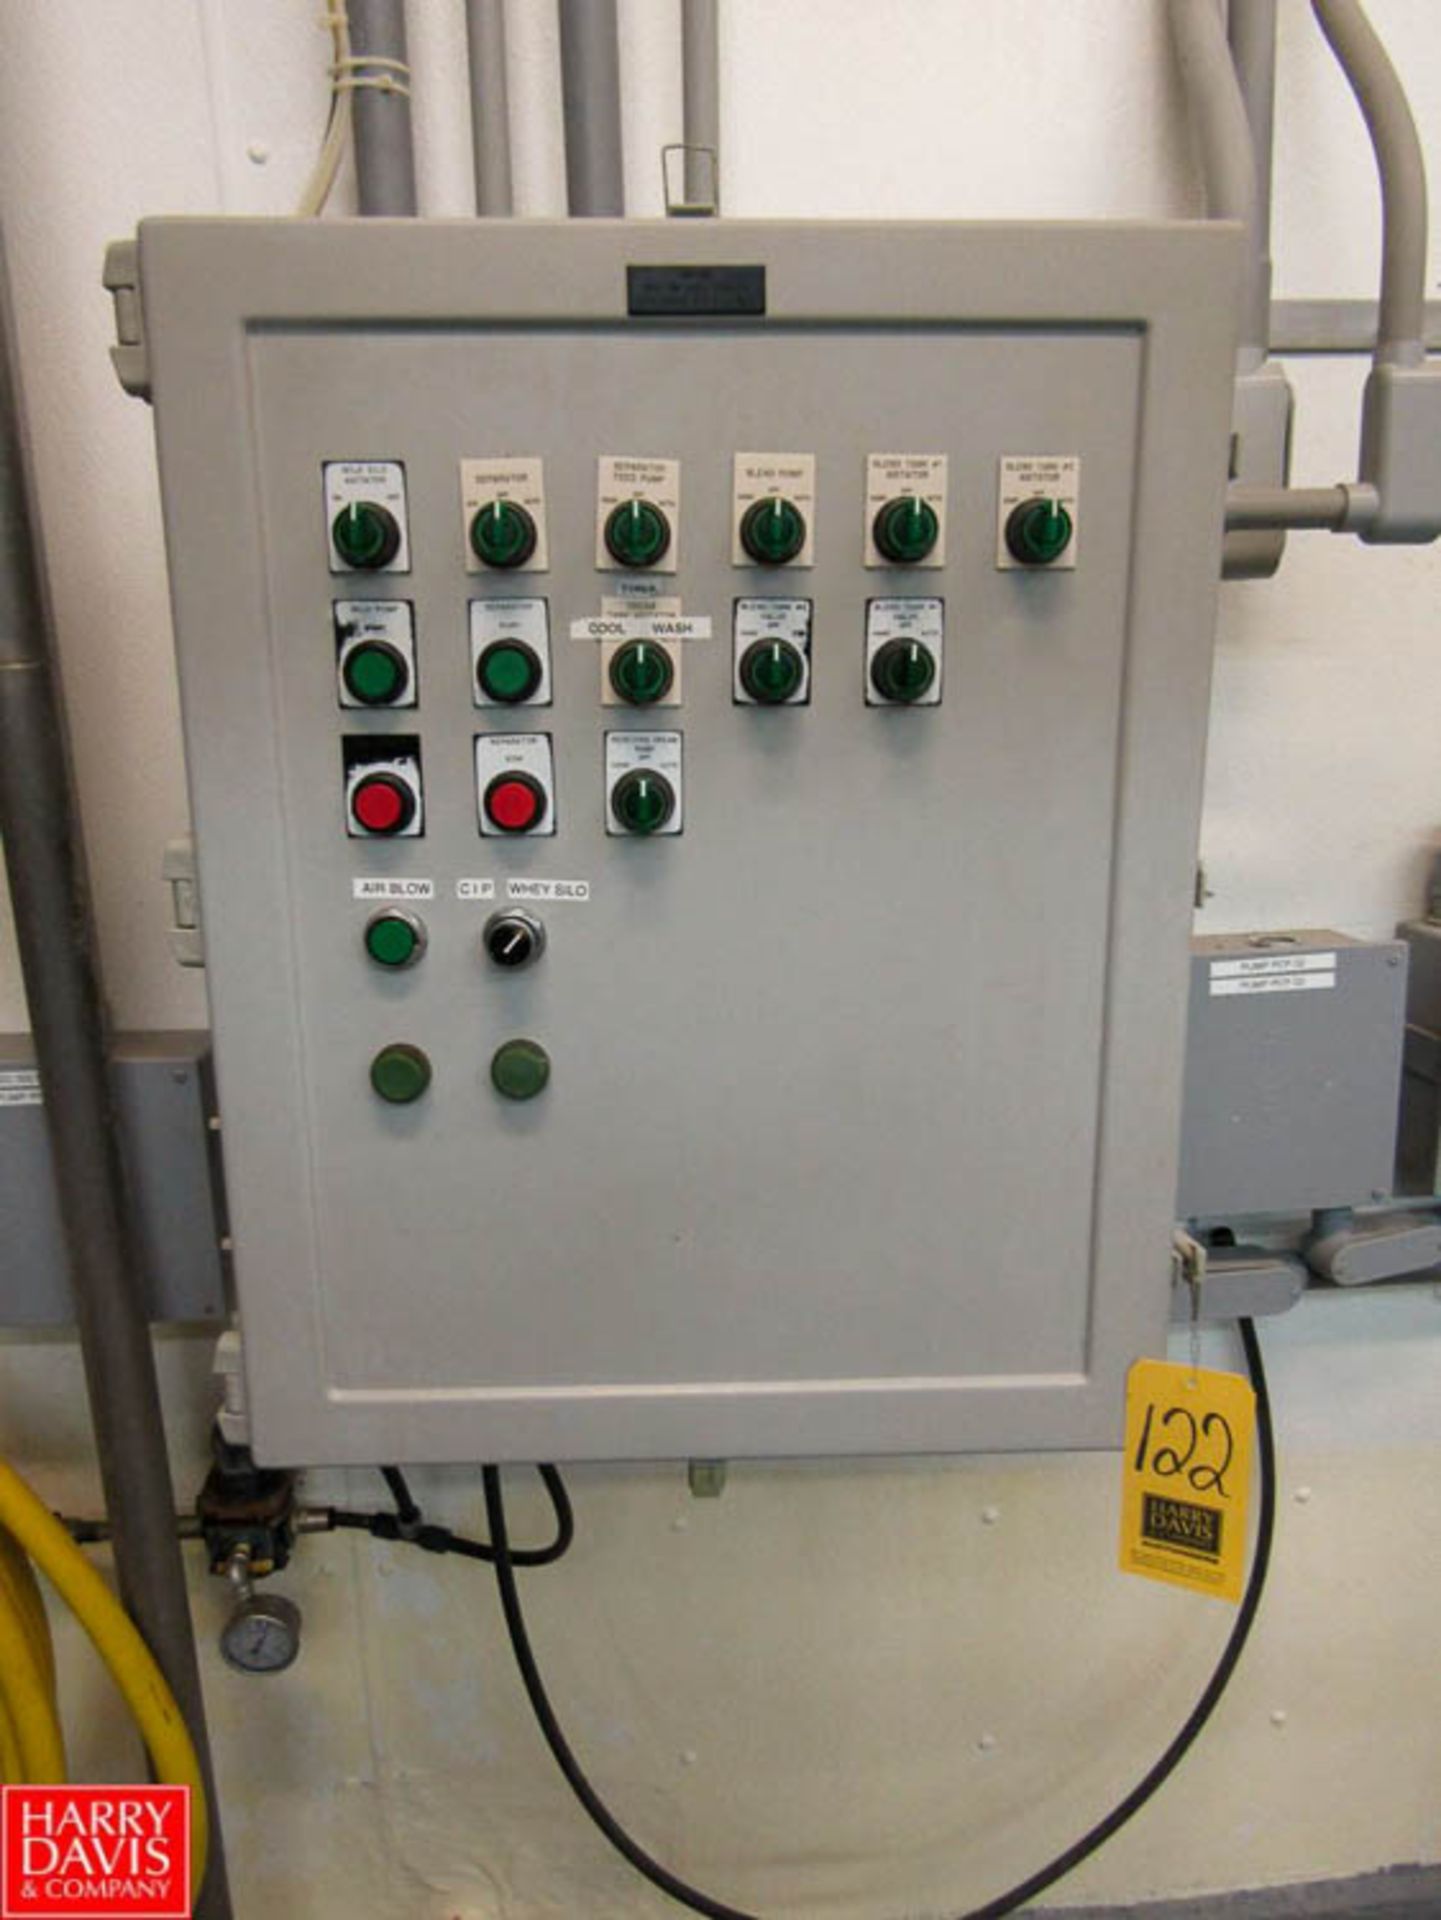 Silo Room Control Panel with Timing Pump Rigging Fee: $ 75